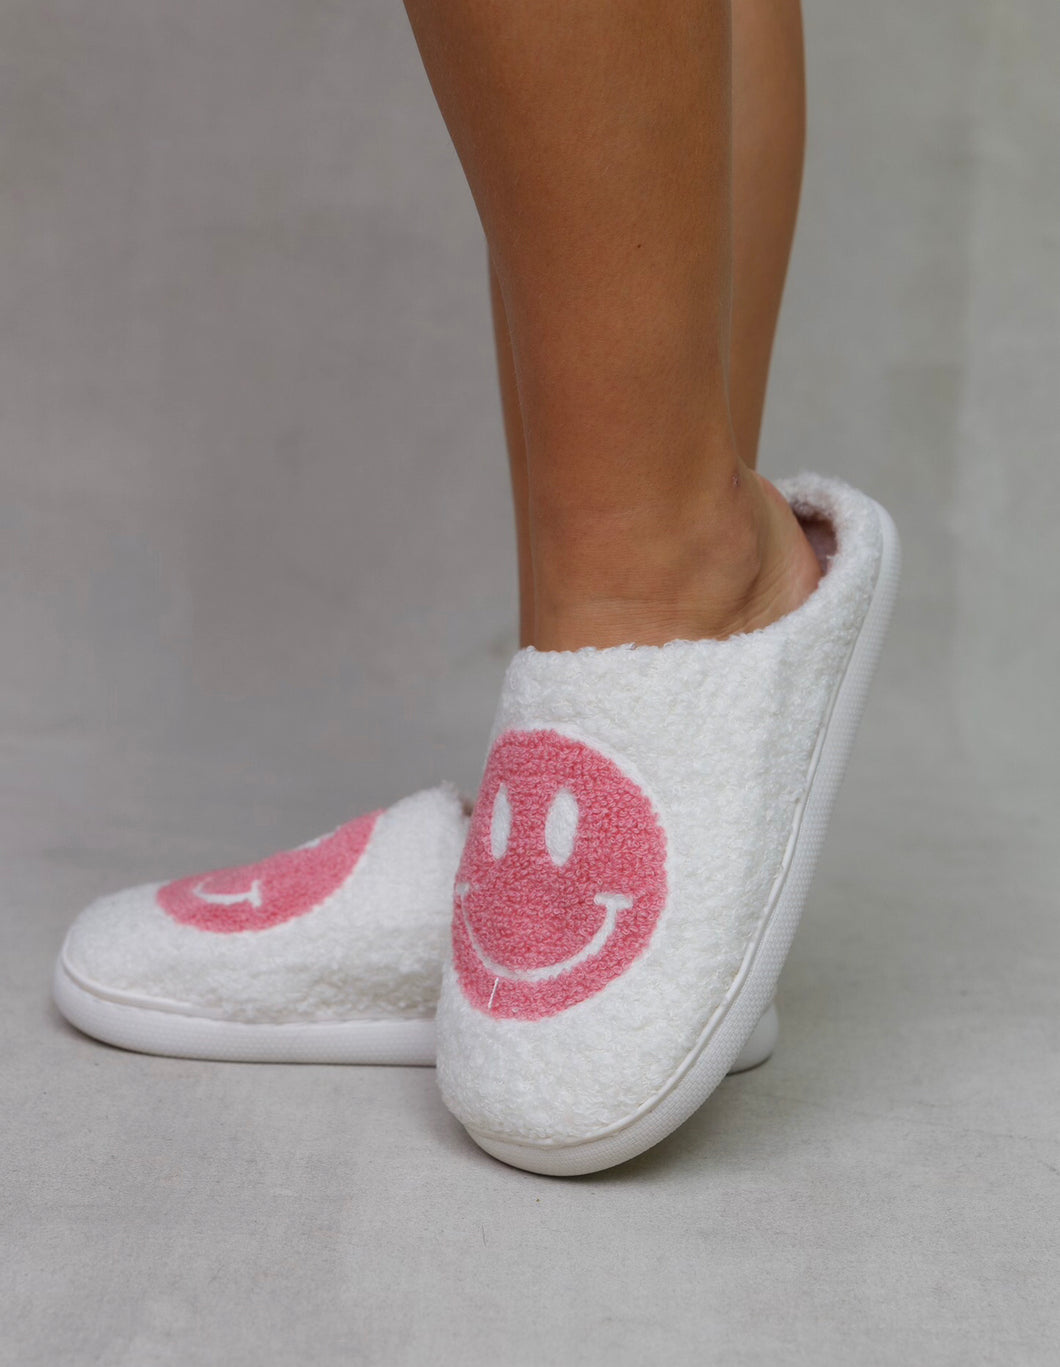 White slippers with pink smiley face